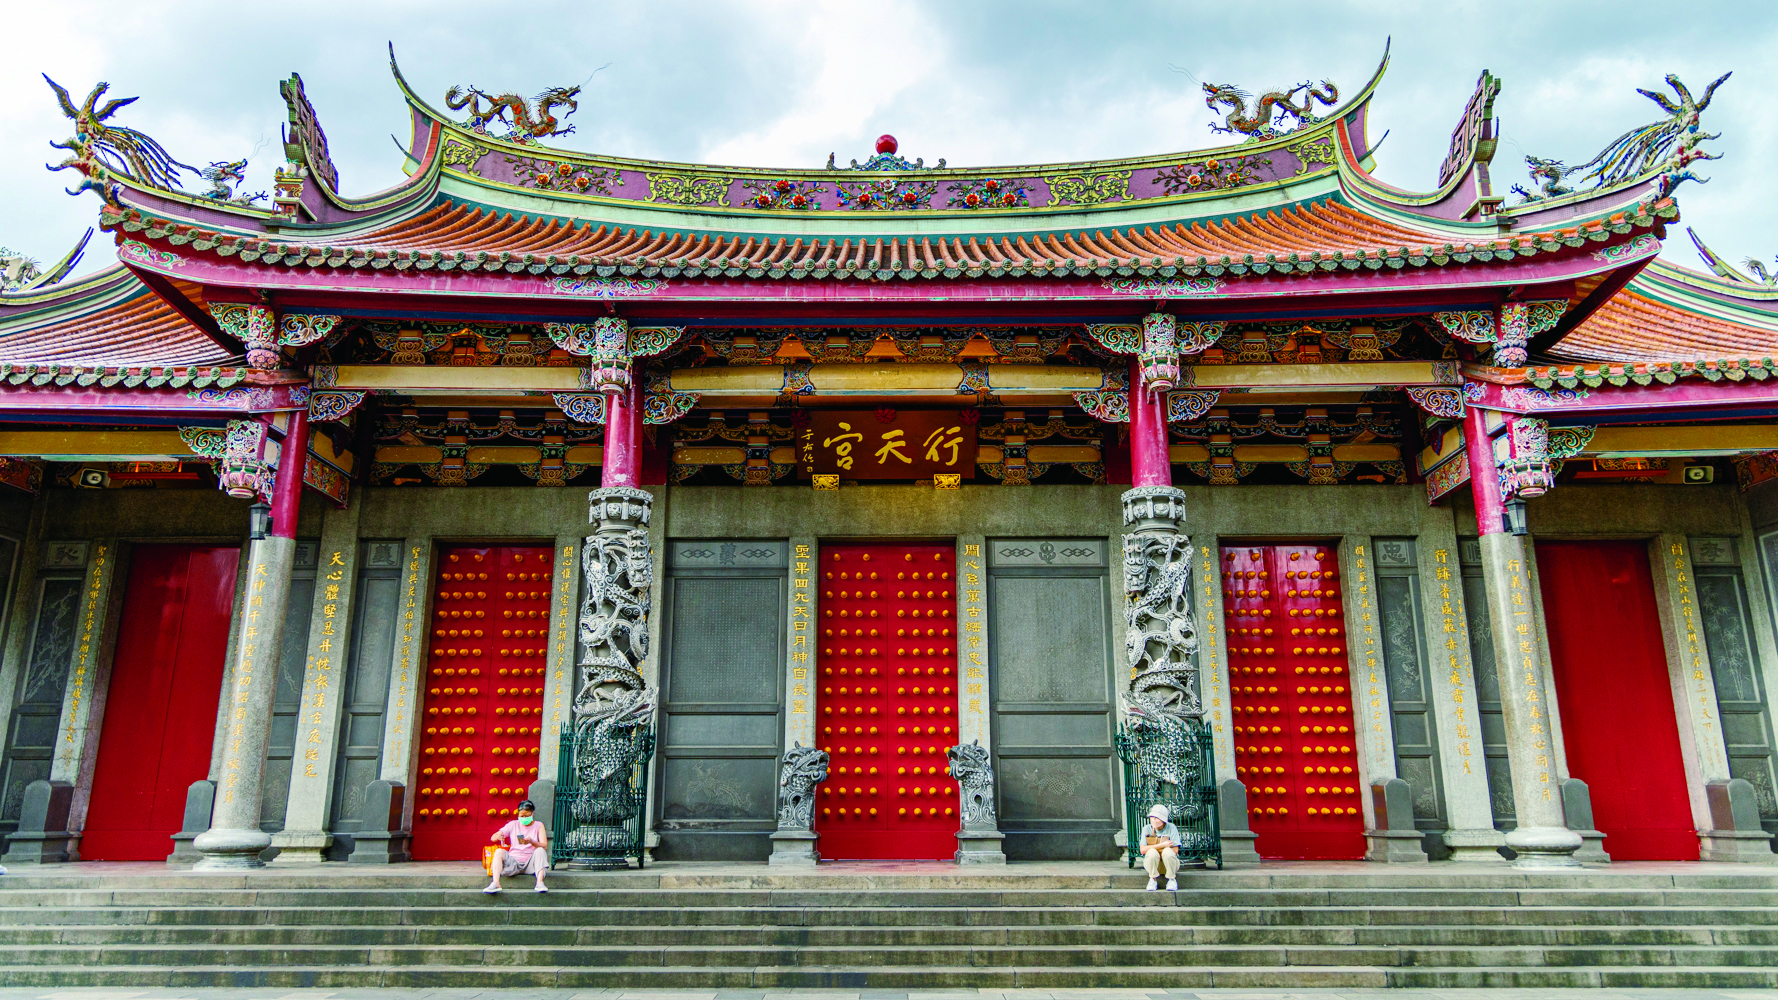 The most distinctive features of Xingtian Temple are the fact that no rituals involving animals are held, no burning of joss paper, no theatrical performances for the gods, no fundraising, and no commercial activities of any kind. (Photo・Department of Information and Tourism, Taipei City Government)